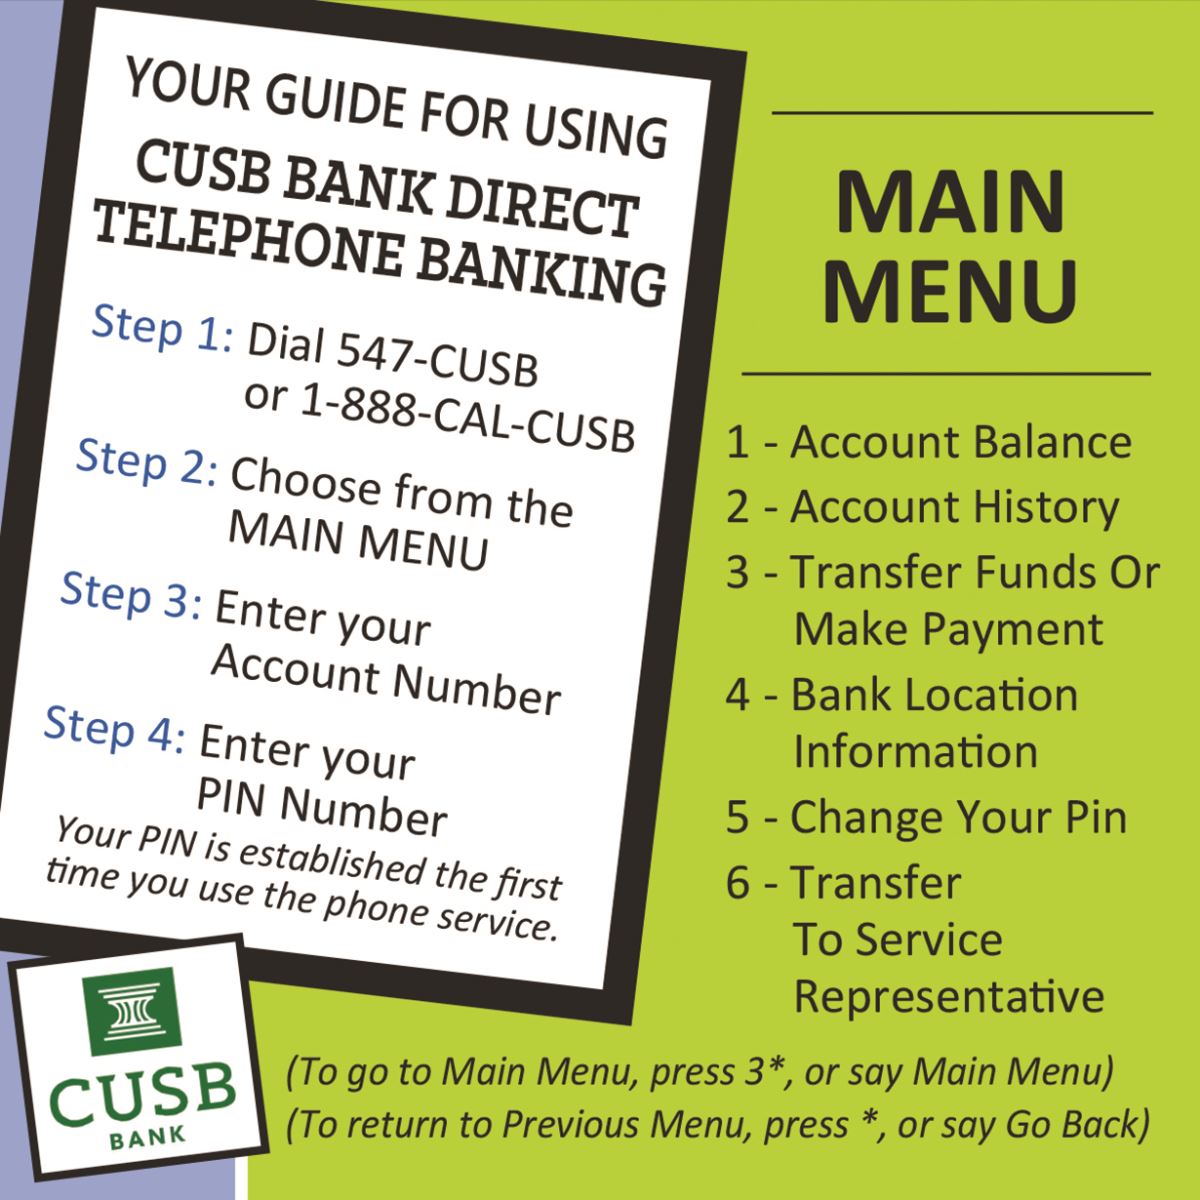 Guide for Telephone Banking